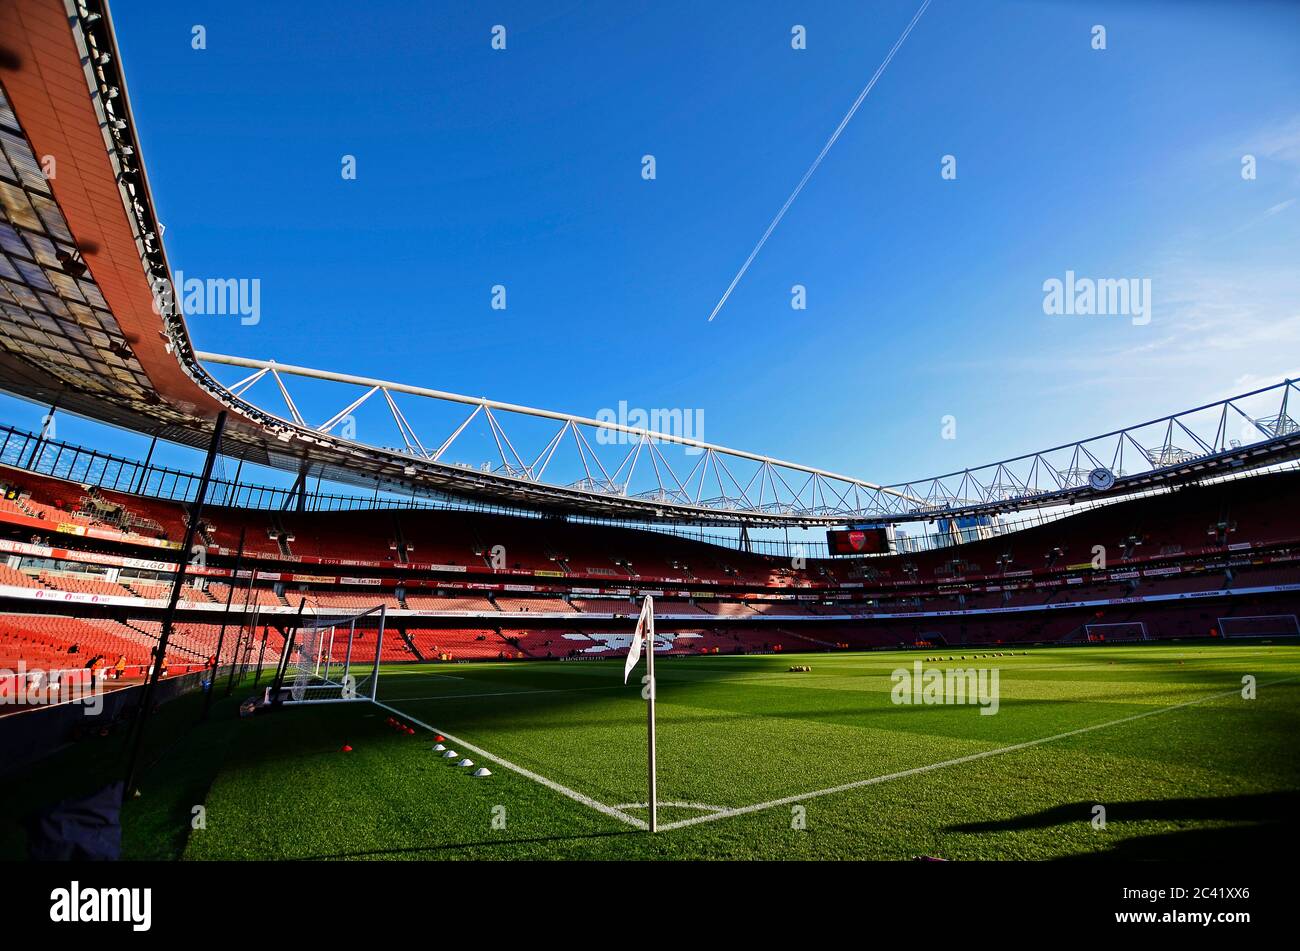 LONDON, ENGLAND - JANUARY 18, 2020: General view of the venue pictured ahead of the 2019/20 Premier League game between Arsenal FC and Sheffield United FC at Emirates Stadium. Stock Photo